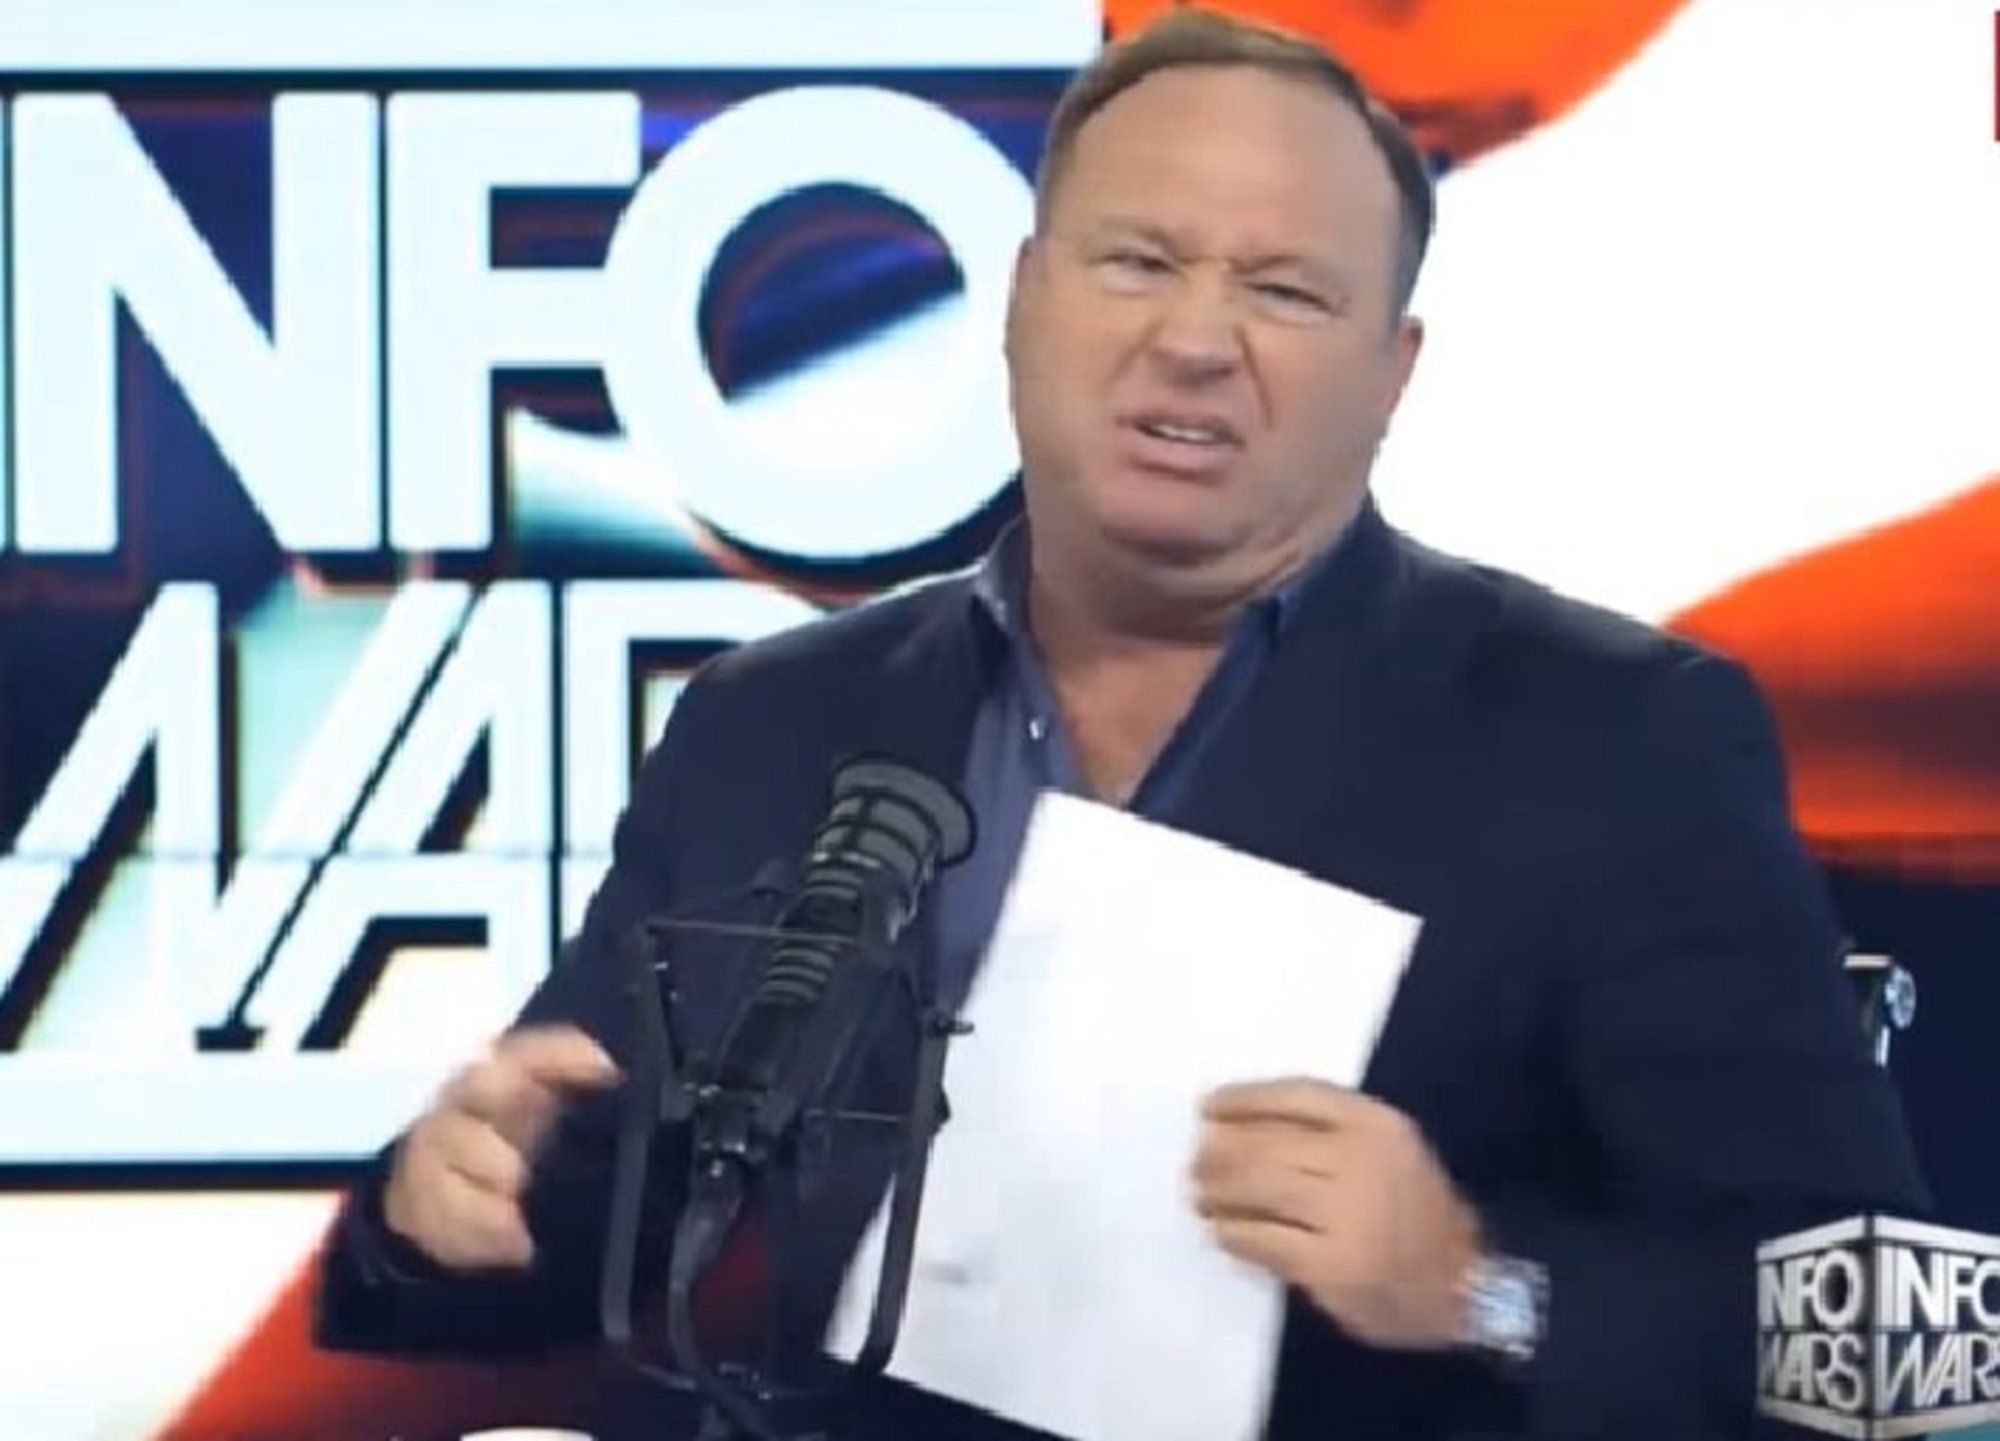 alex jones theyre turning the frogs gay